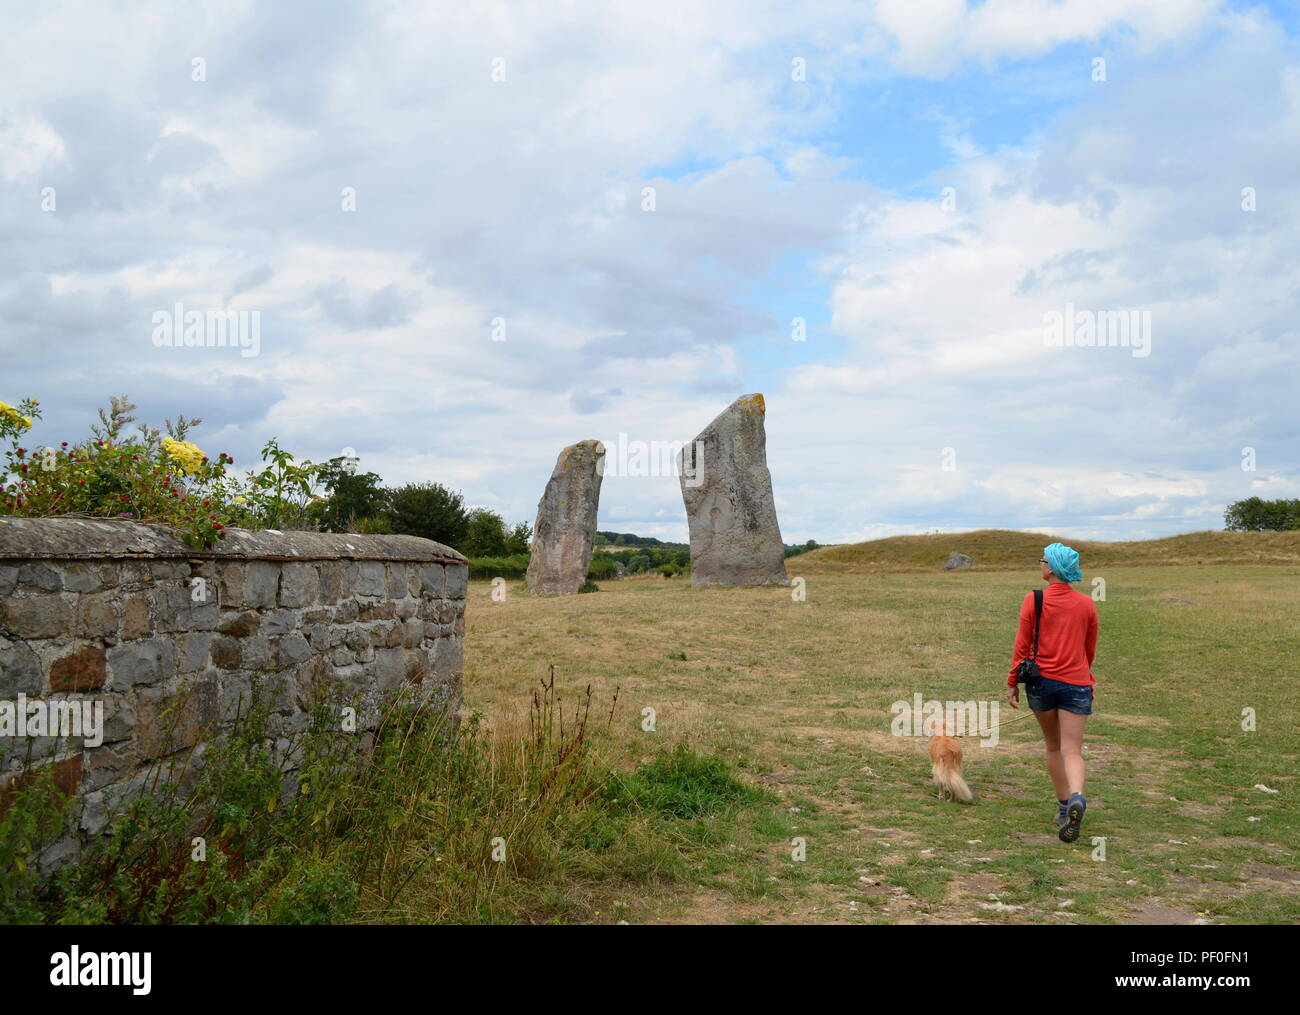 A woman walking her dog at Avebury, a monument containing three stone circles, around the village of Avebury in Wiltshire, in southwest England. Stock Photo